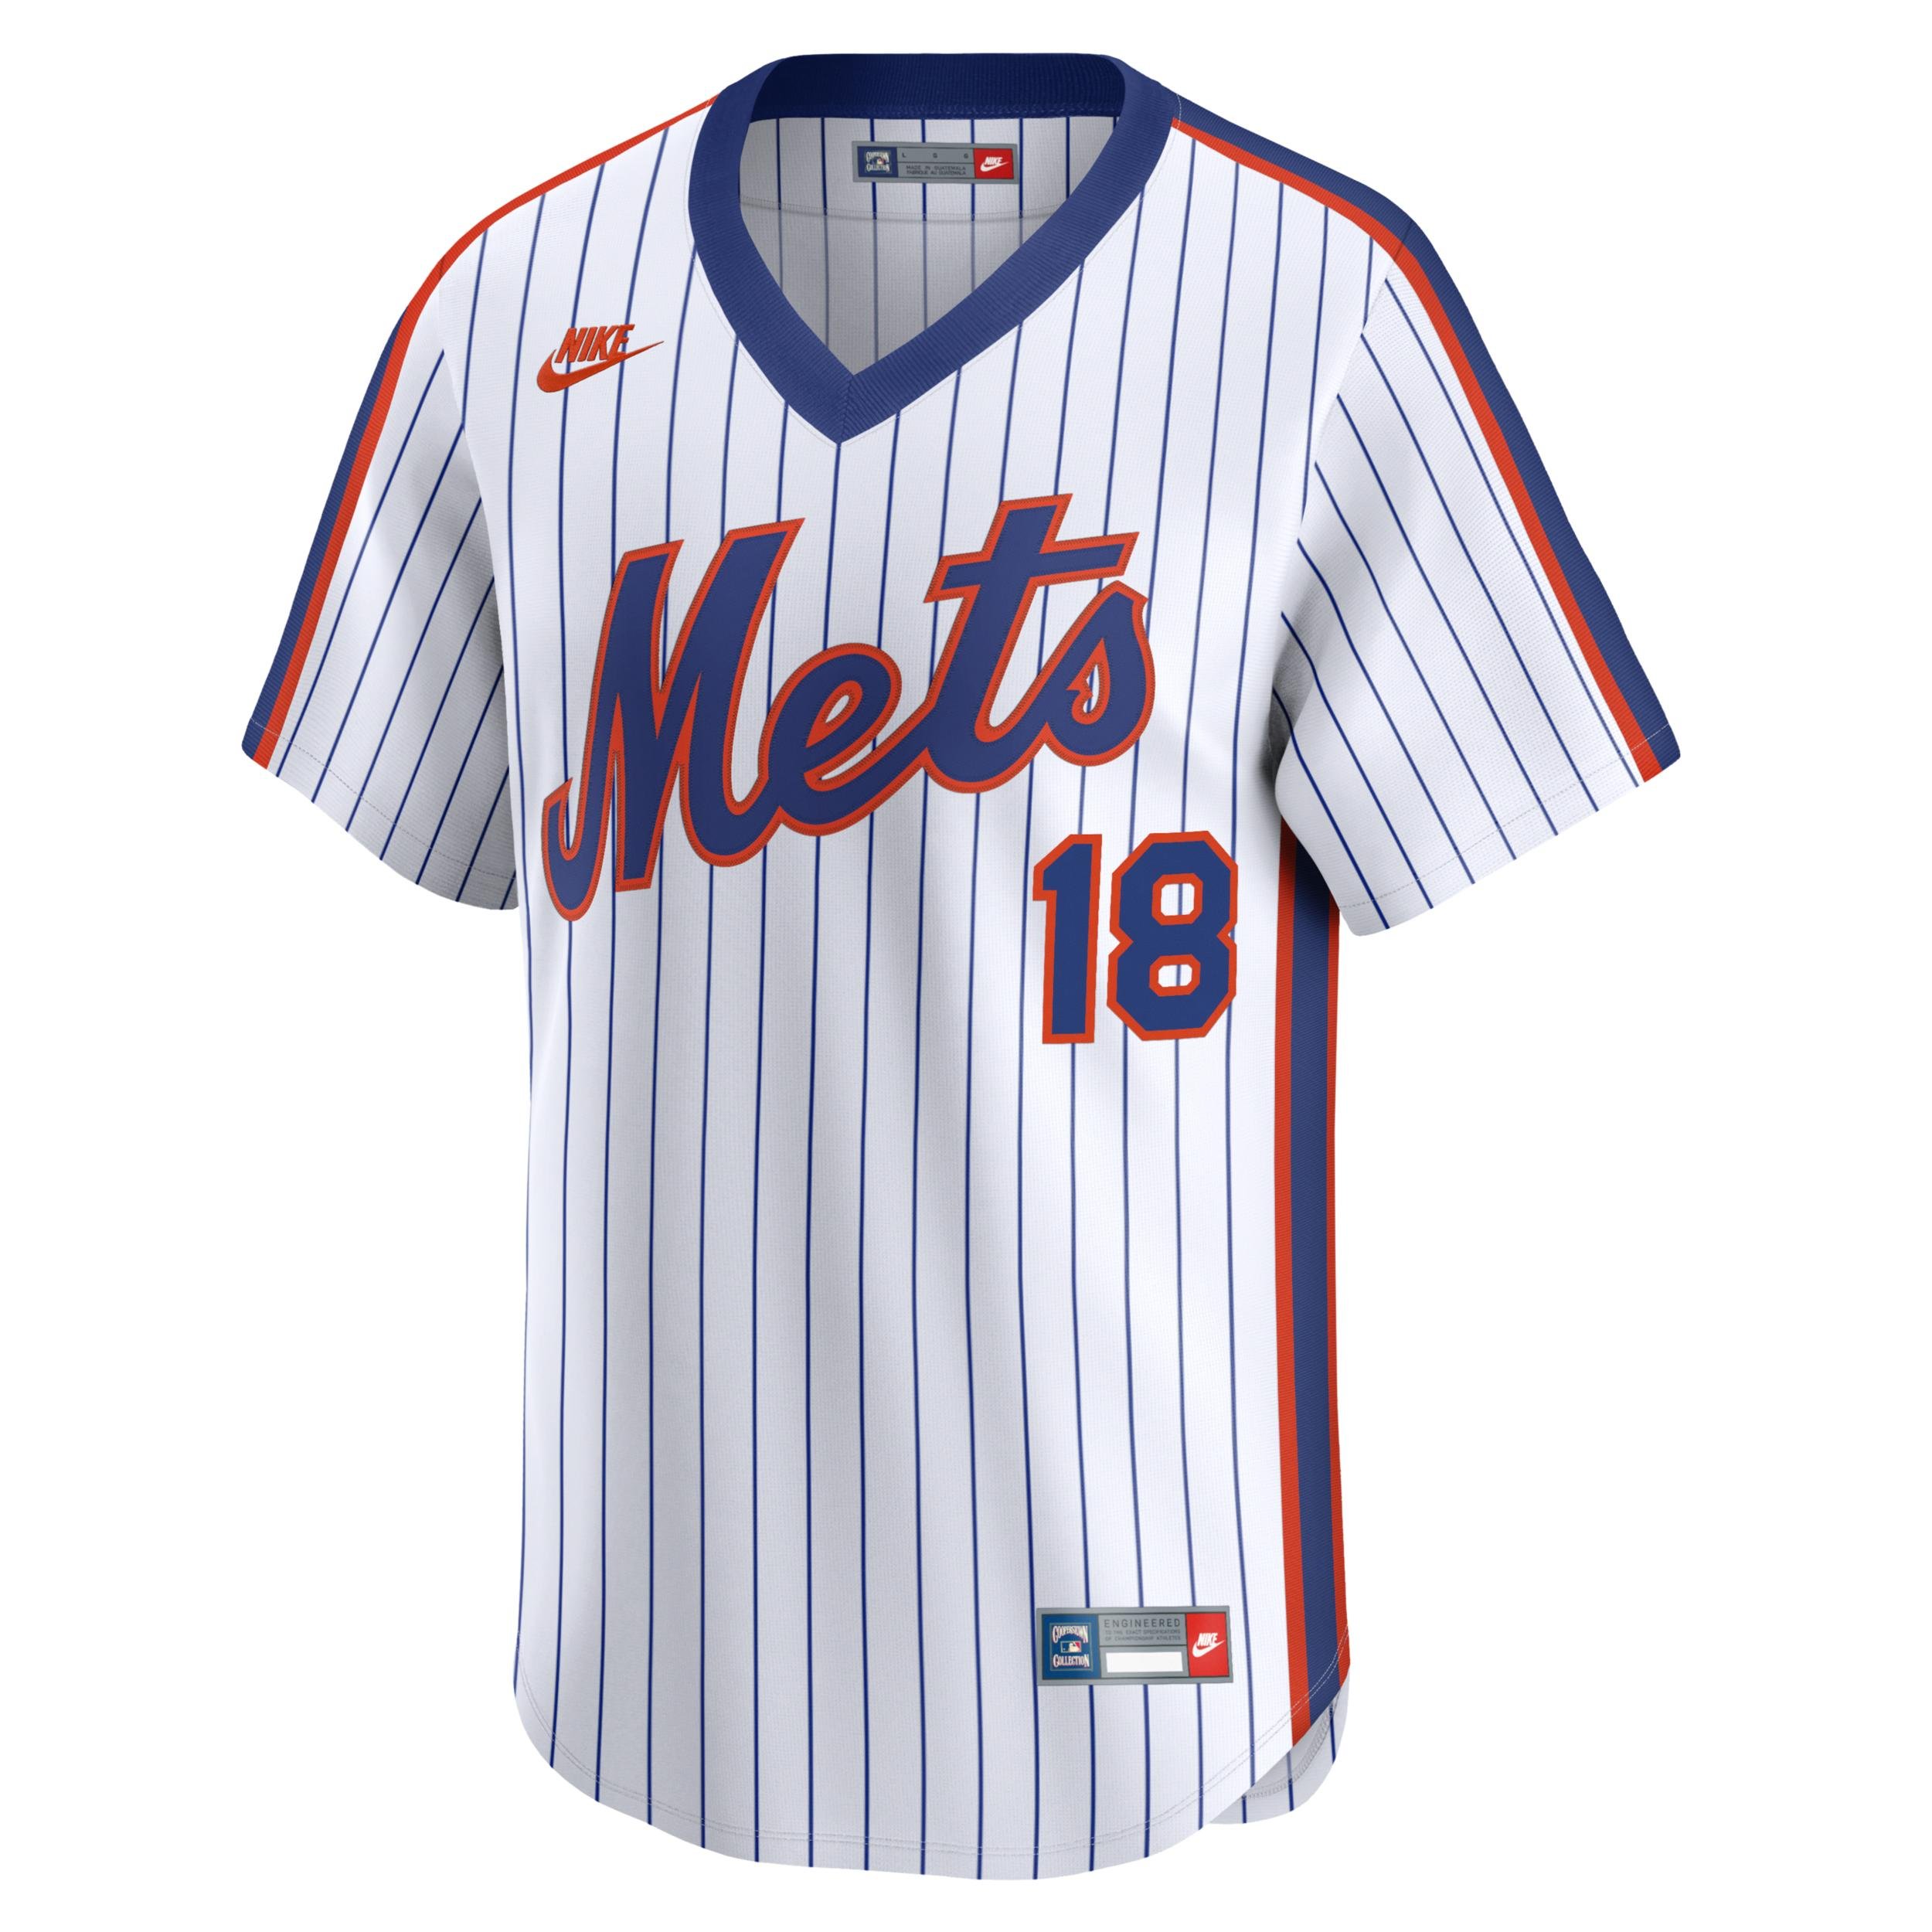 Darryl Strawberry New York Mets Cooperstown Nike Men's Dri-FIT ADV MLB Limited Jersey by NIKE